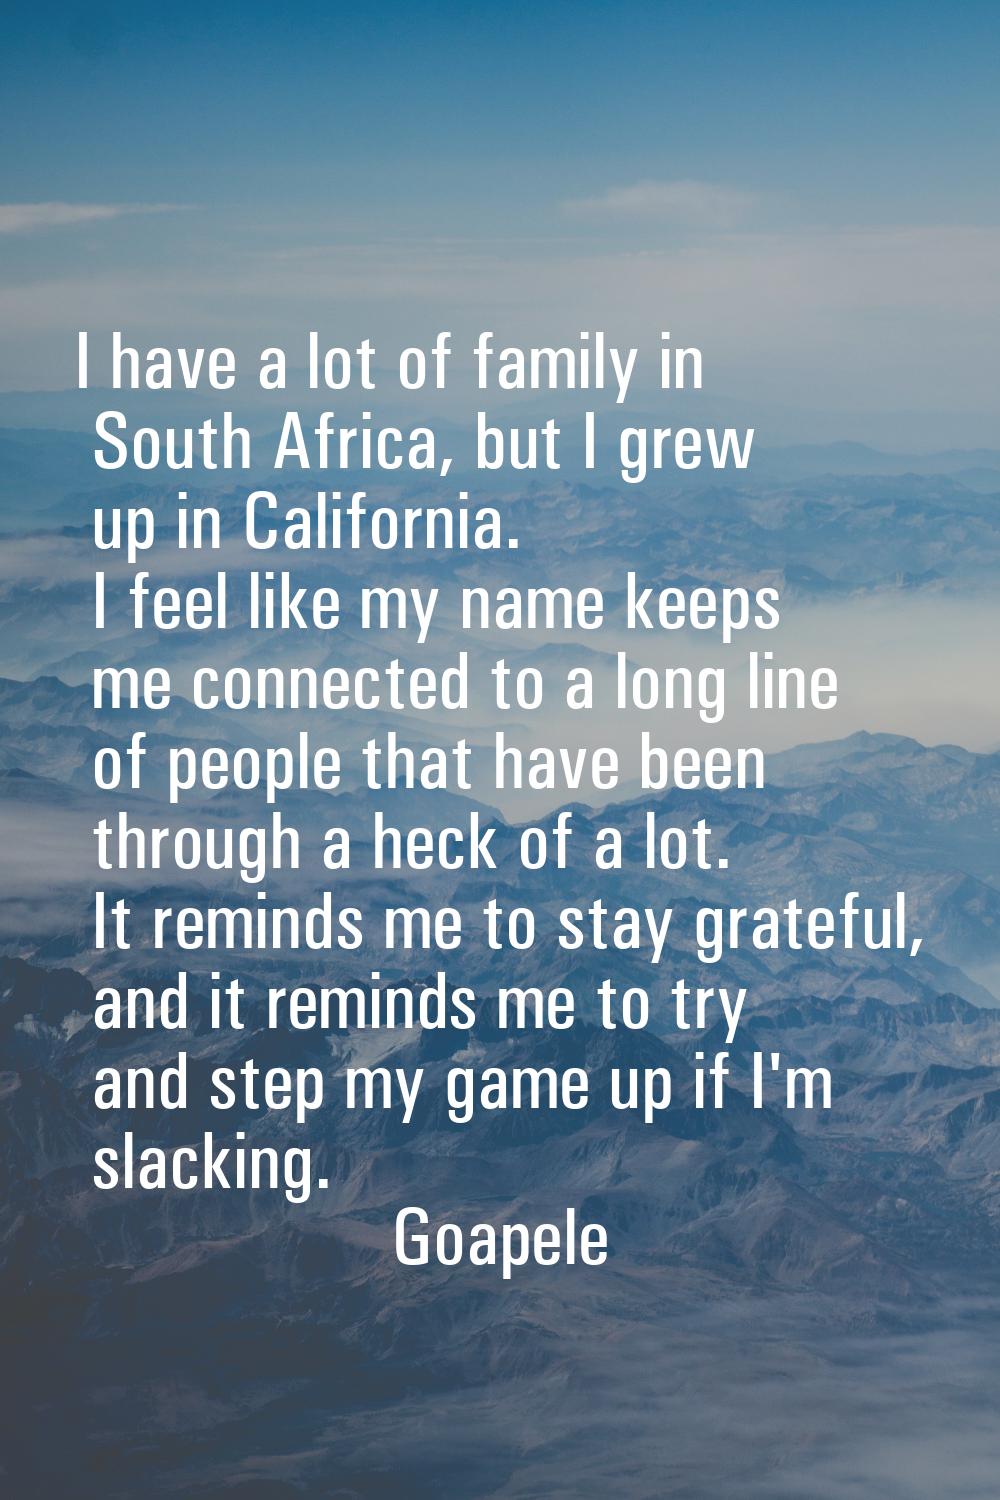 I have a lot of family in South Africa, but I grew up in California. I feel like my name keeps me c